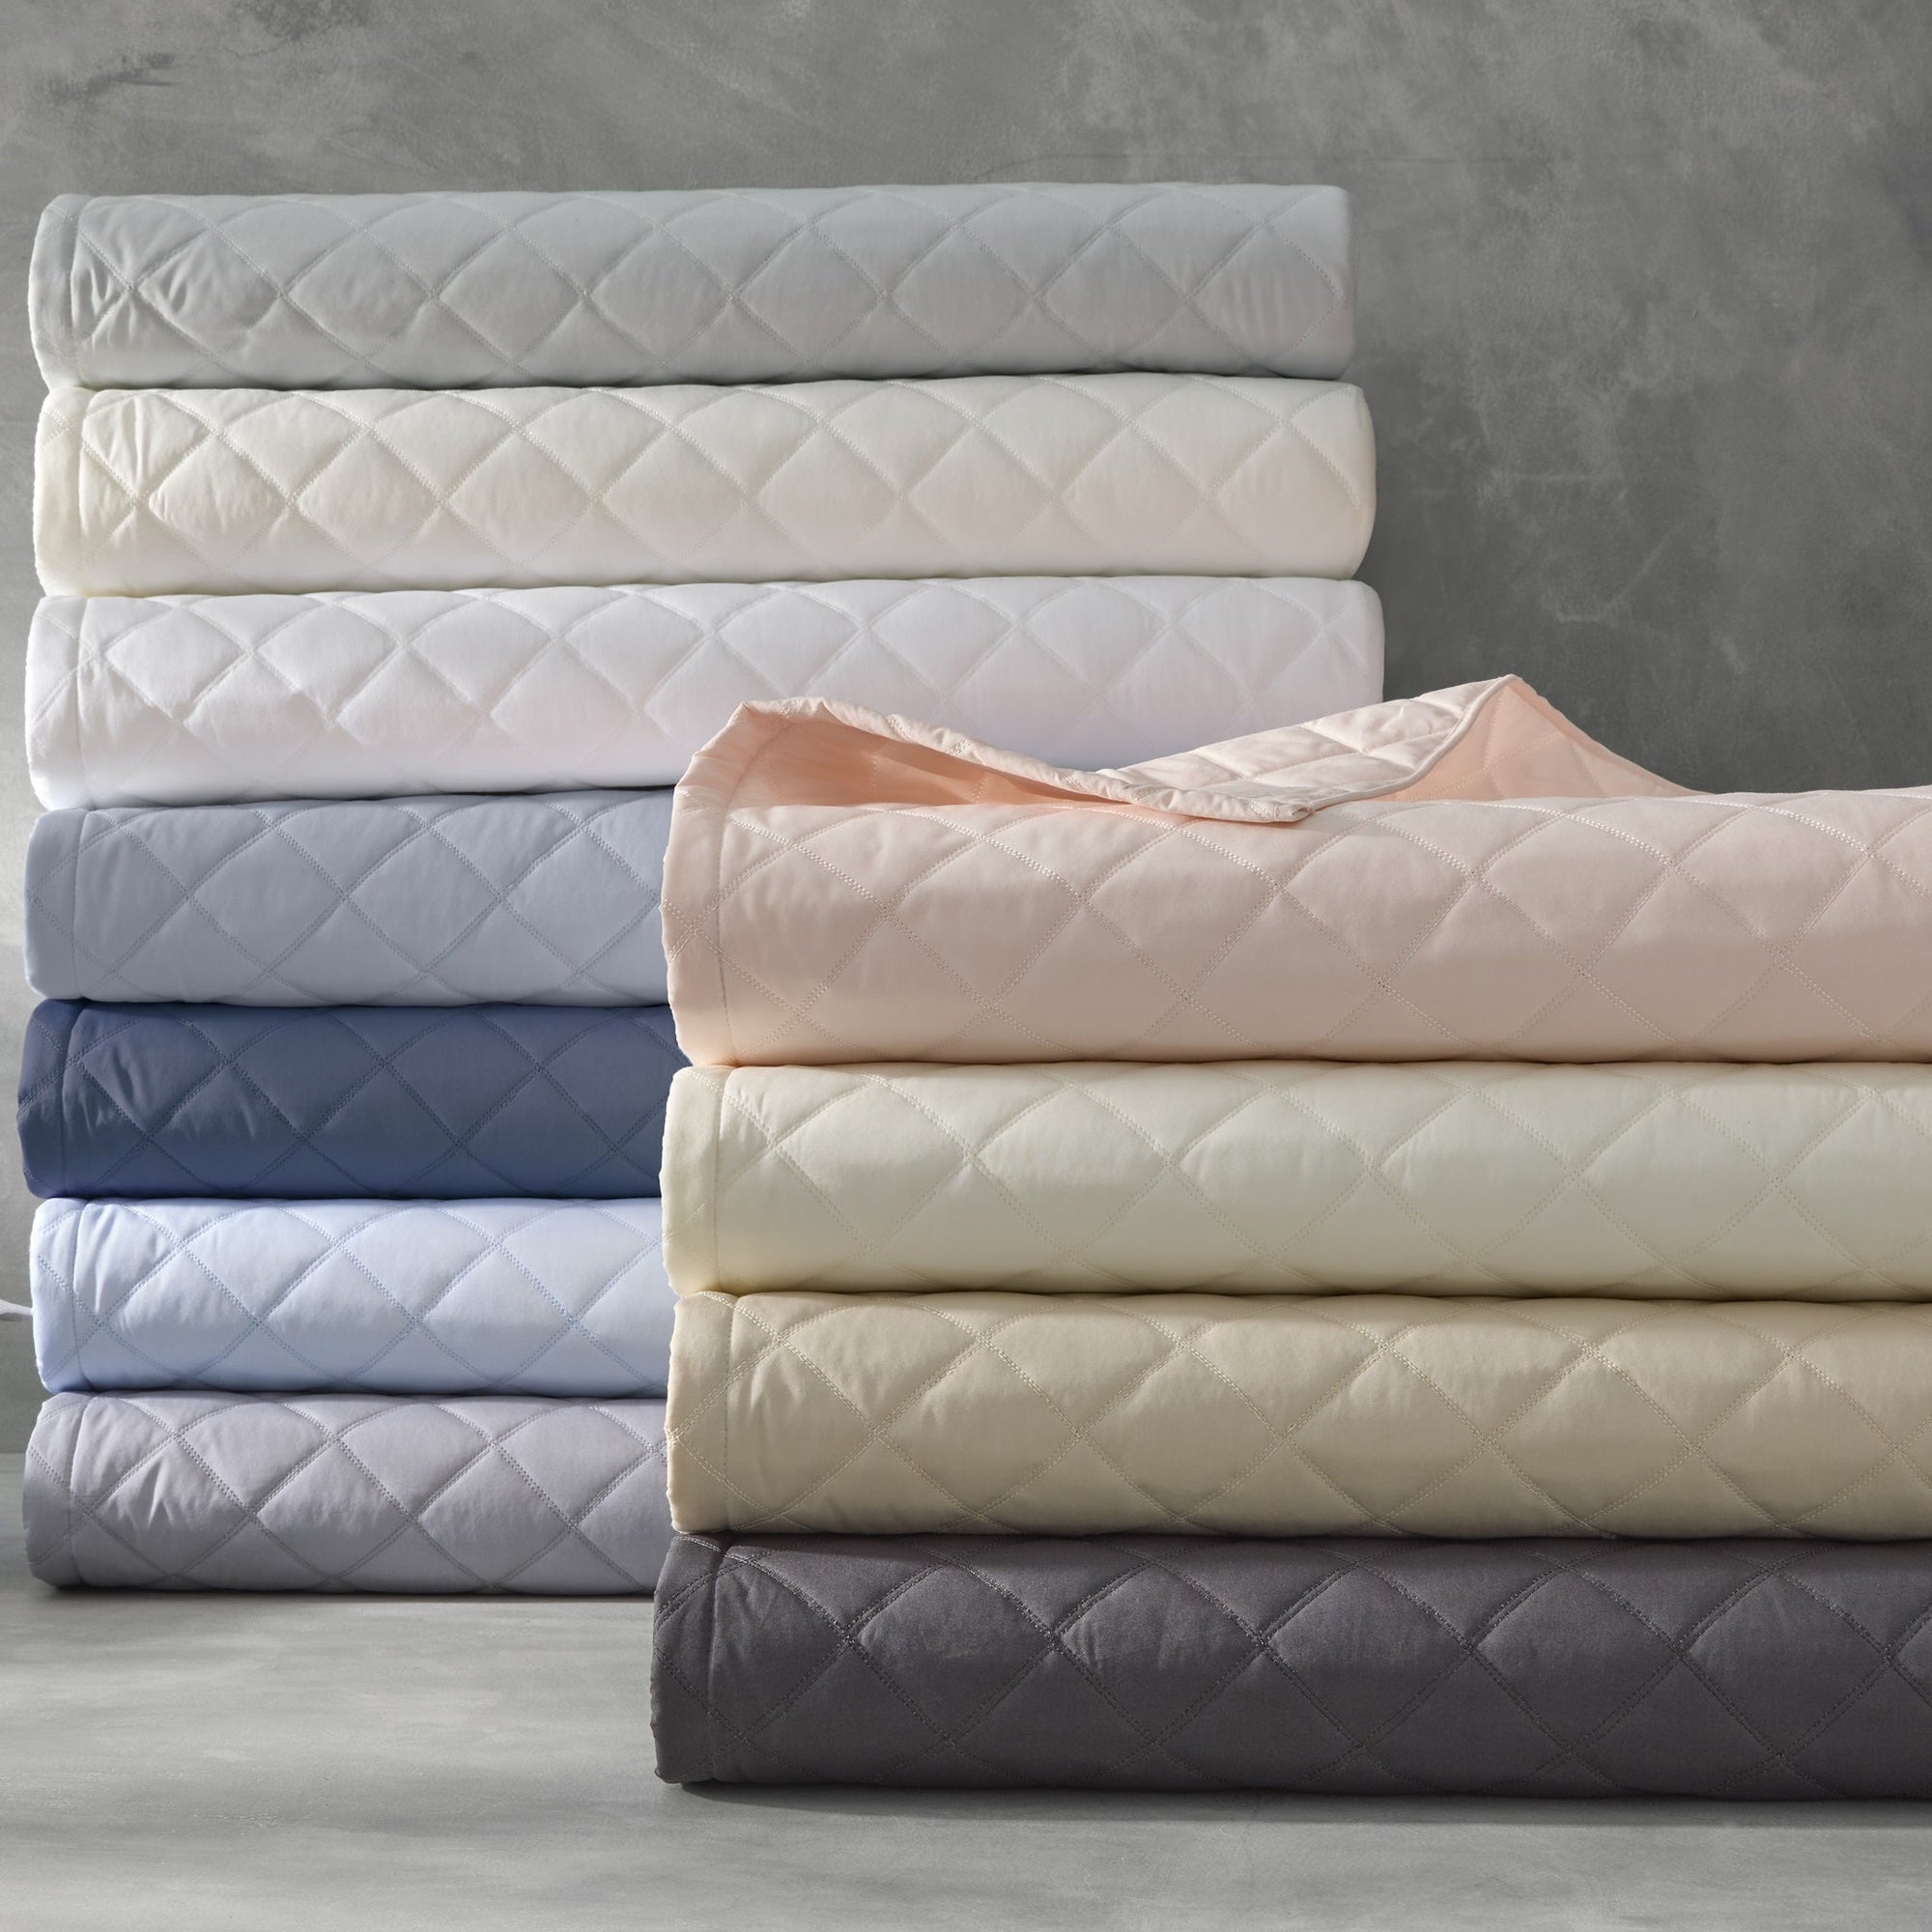 Stack of Matouk Milano Quilt Bedding in Different Colors